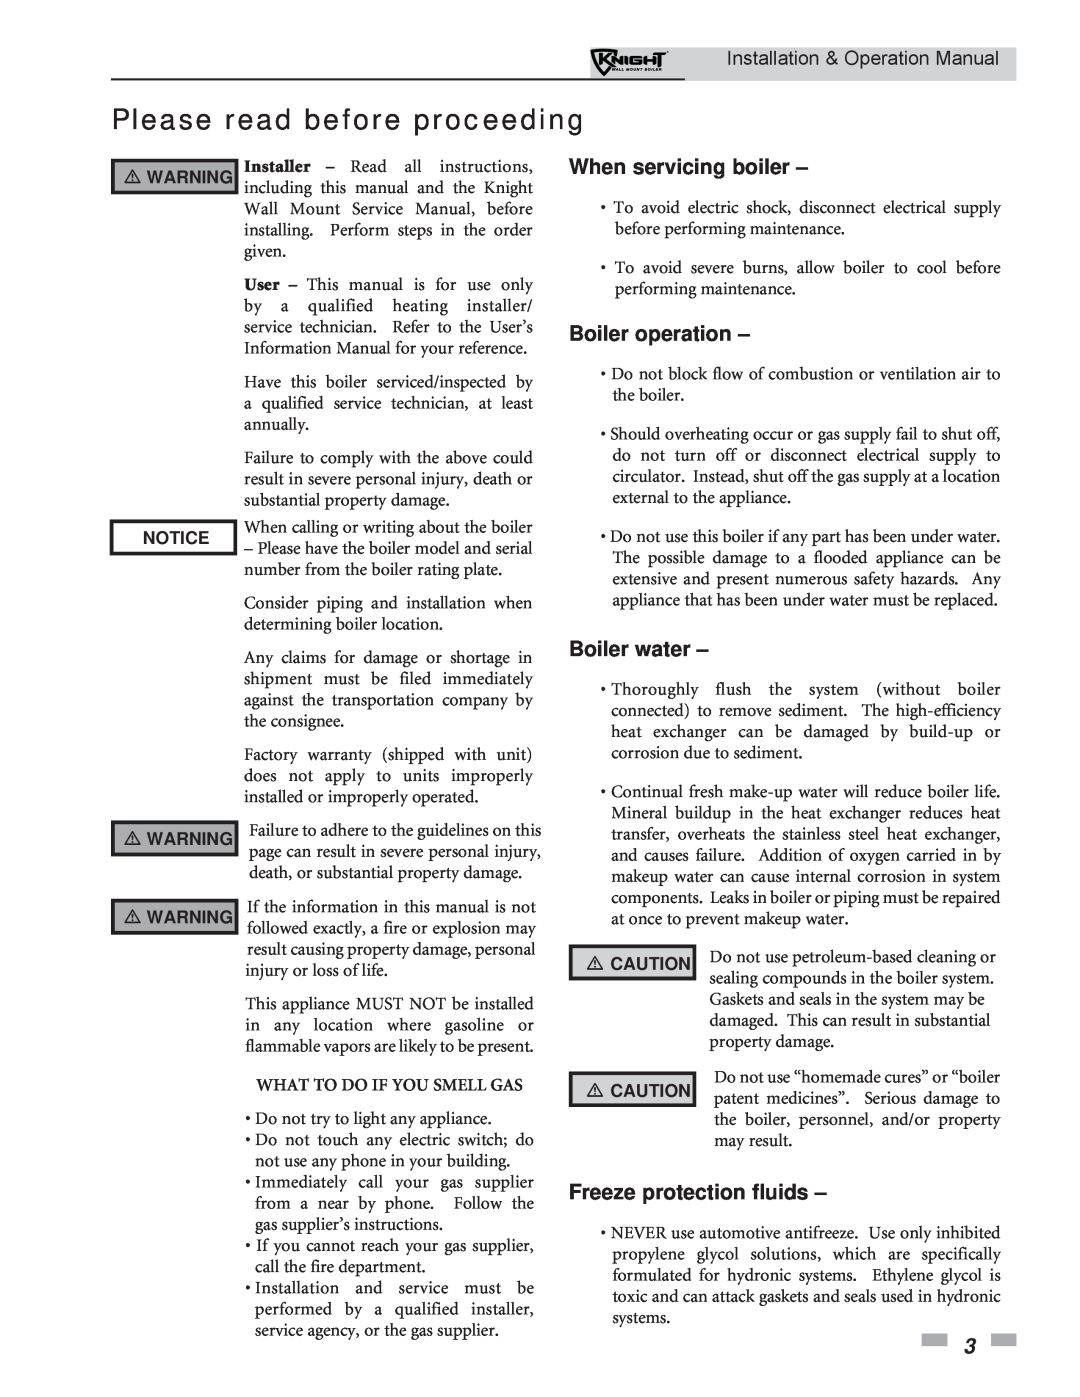 Lochinvar WH 55-399 Please read before proceeding, When servicing boiler, Boiler operation, Boiler water, Notice 